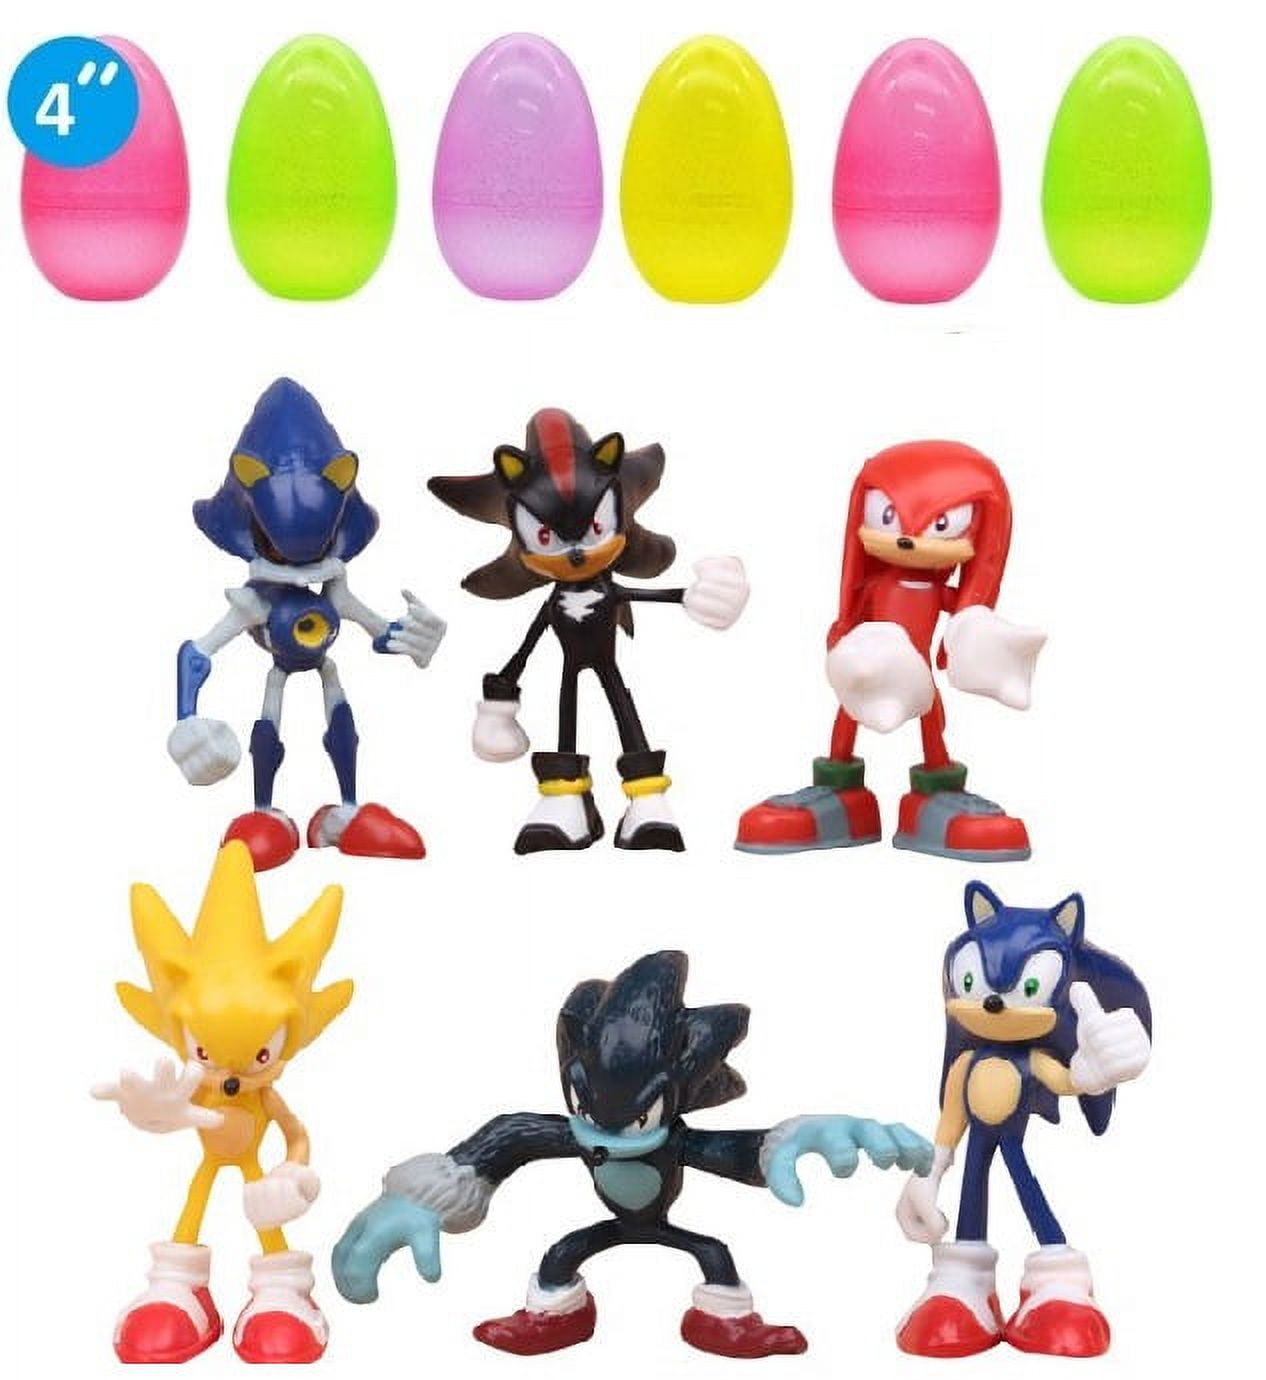 Shadow - Sonic - Silver  Sonic and shadow, Sonic, Sonic the hedgehog